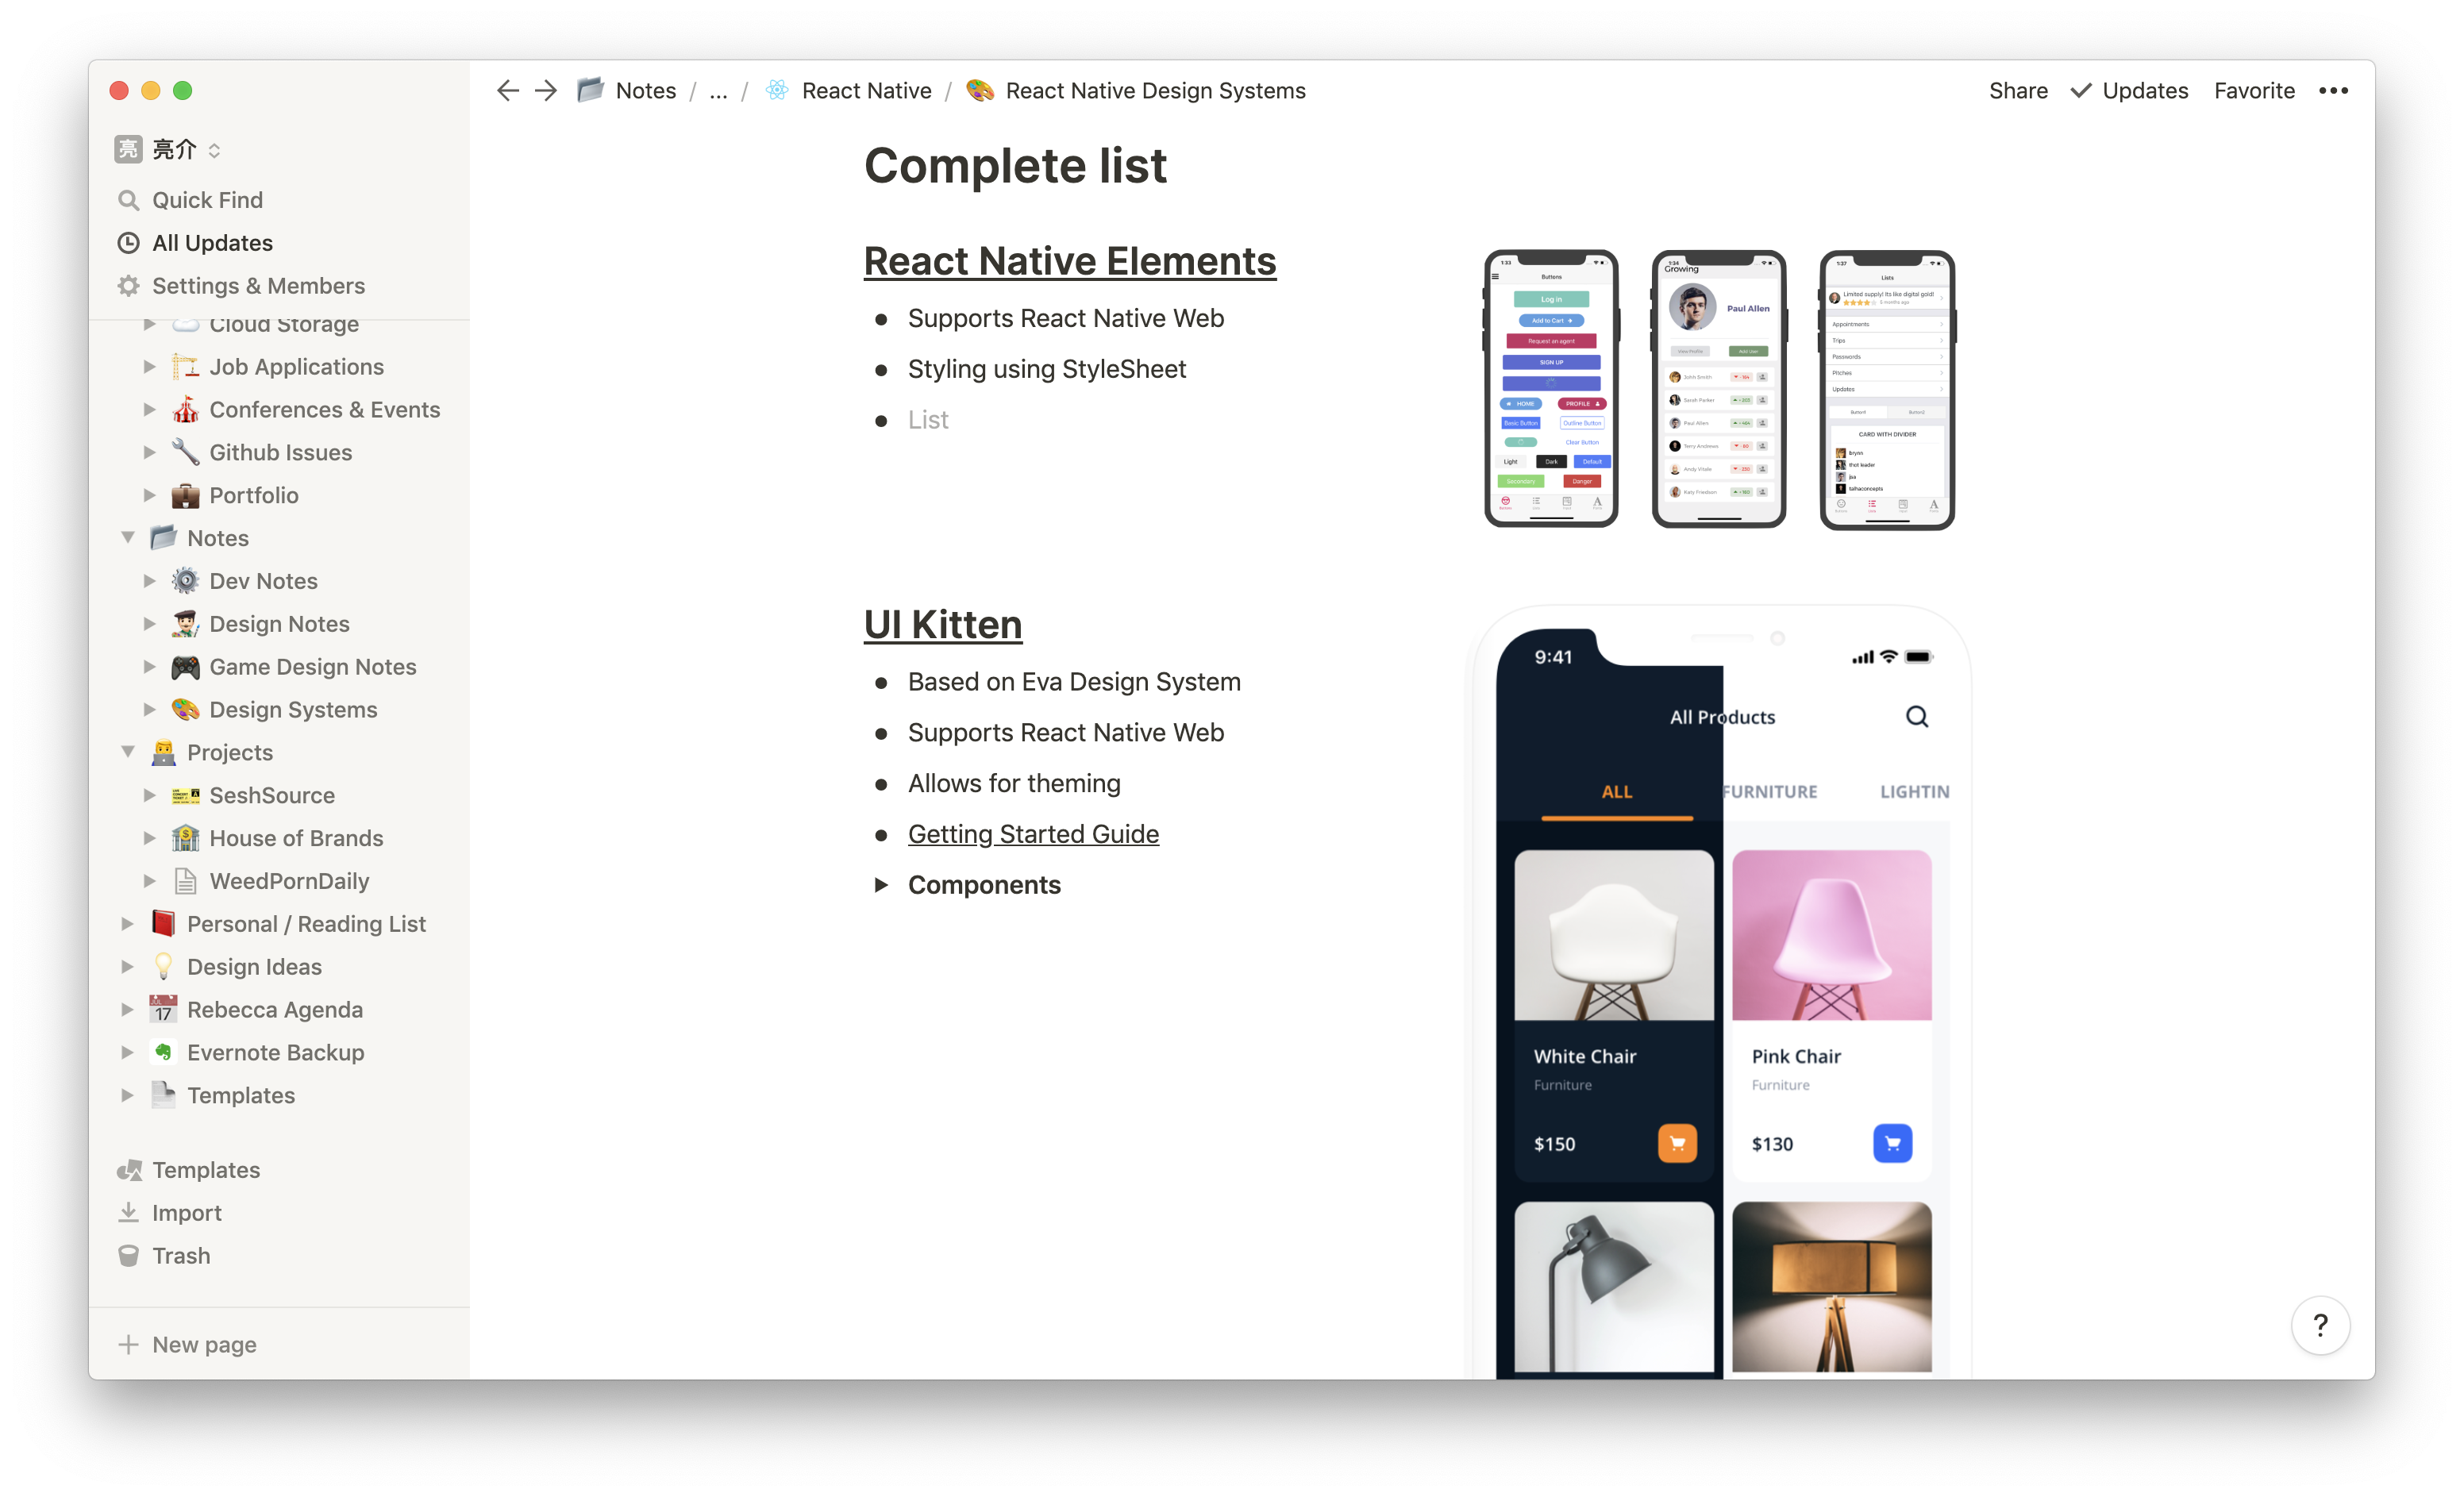 Screenshot of the Notion app on the React Native Design Systems page containing 2 columns - info on systems left and images on right